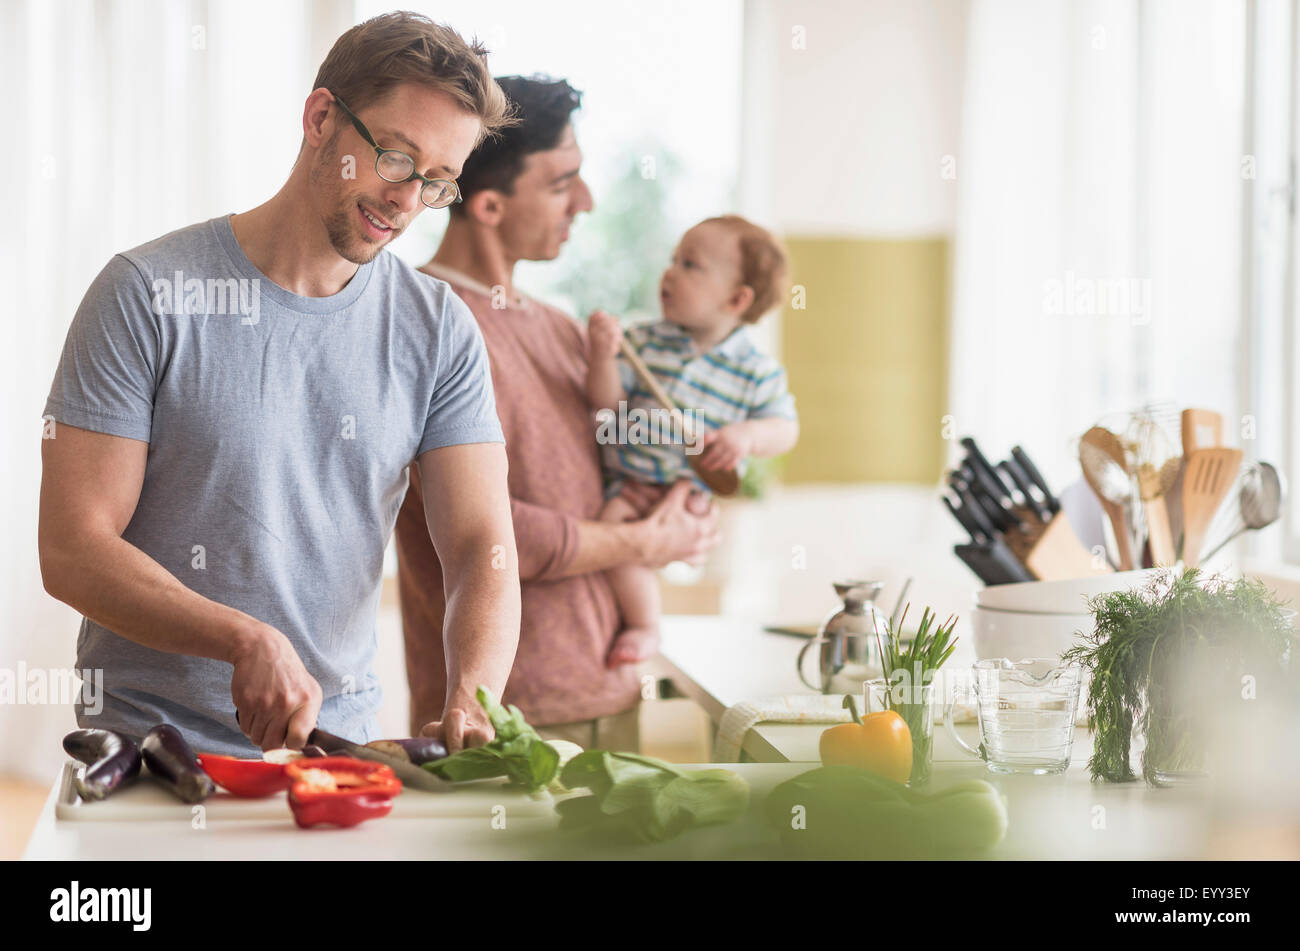 Caucasian gay fathers and baby cooking in kitchen Stock Photo